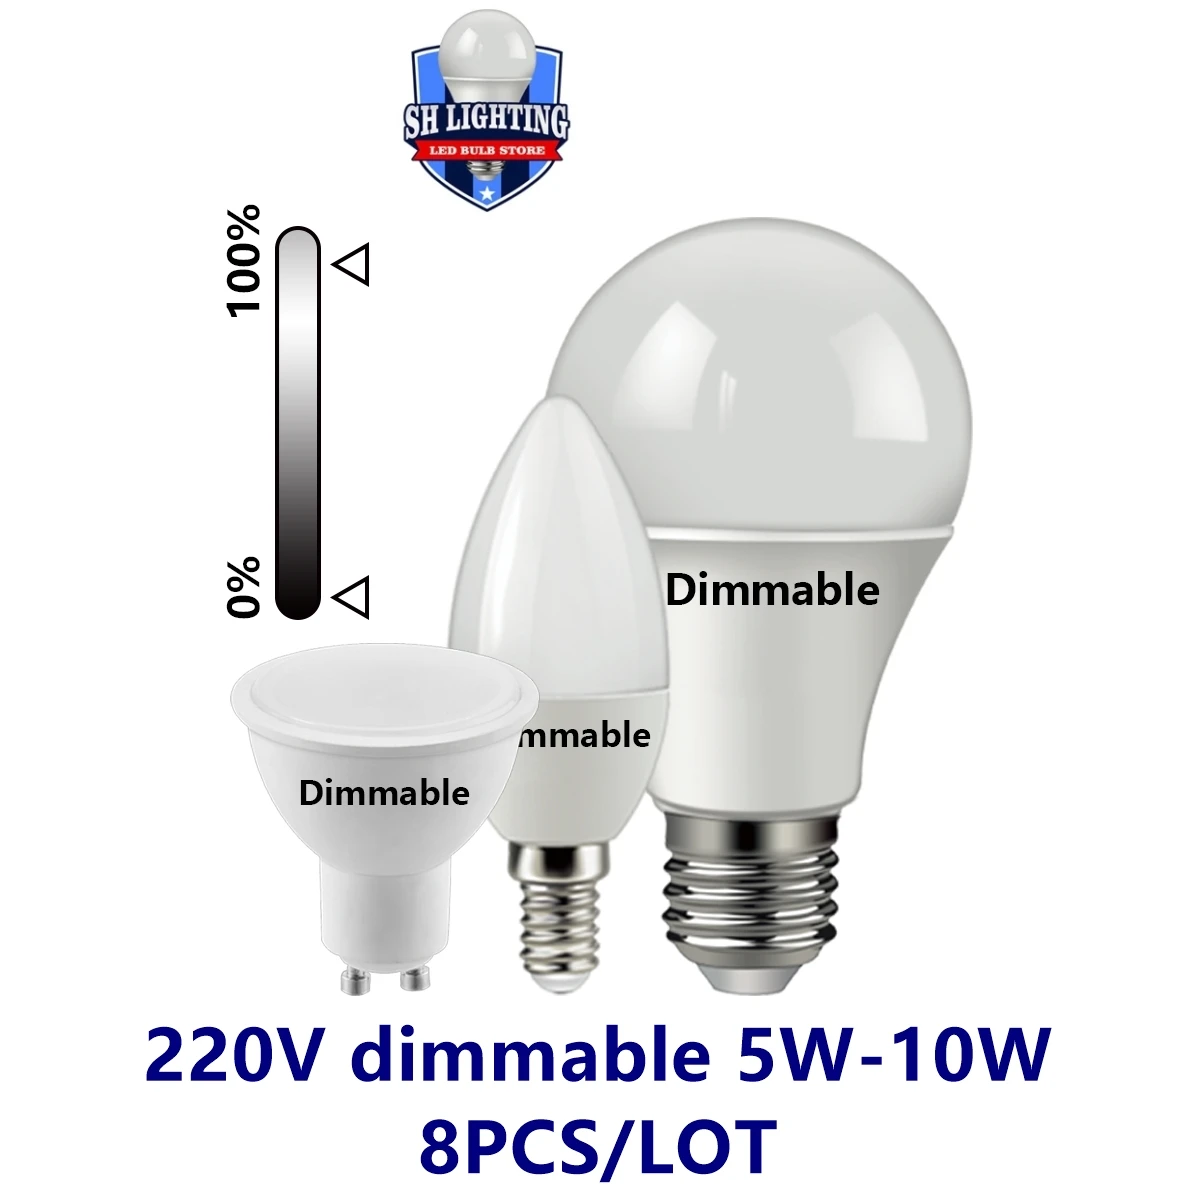 

Factory direct LED dimming spotlight and bulb lamp 220V GU10 A60 C37 5W-10W suitable for all kinds of dimmers without stroboscop